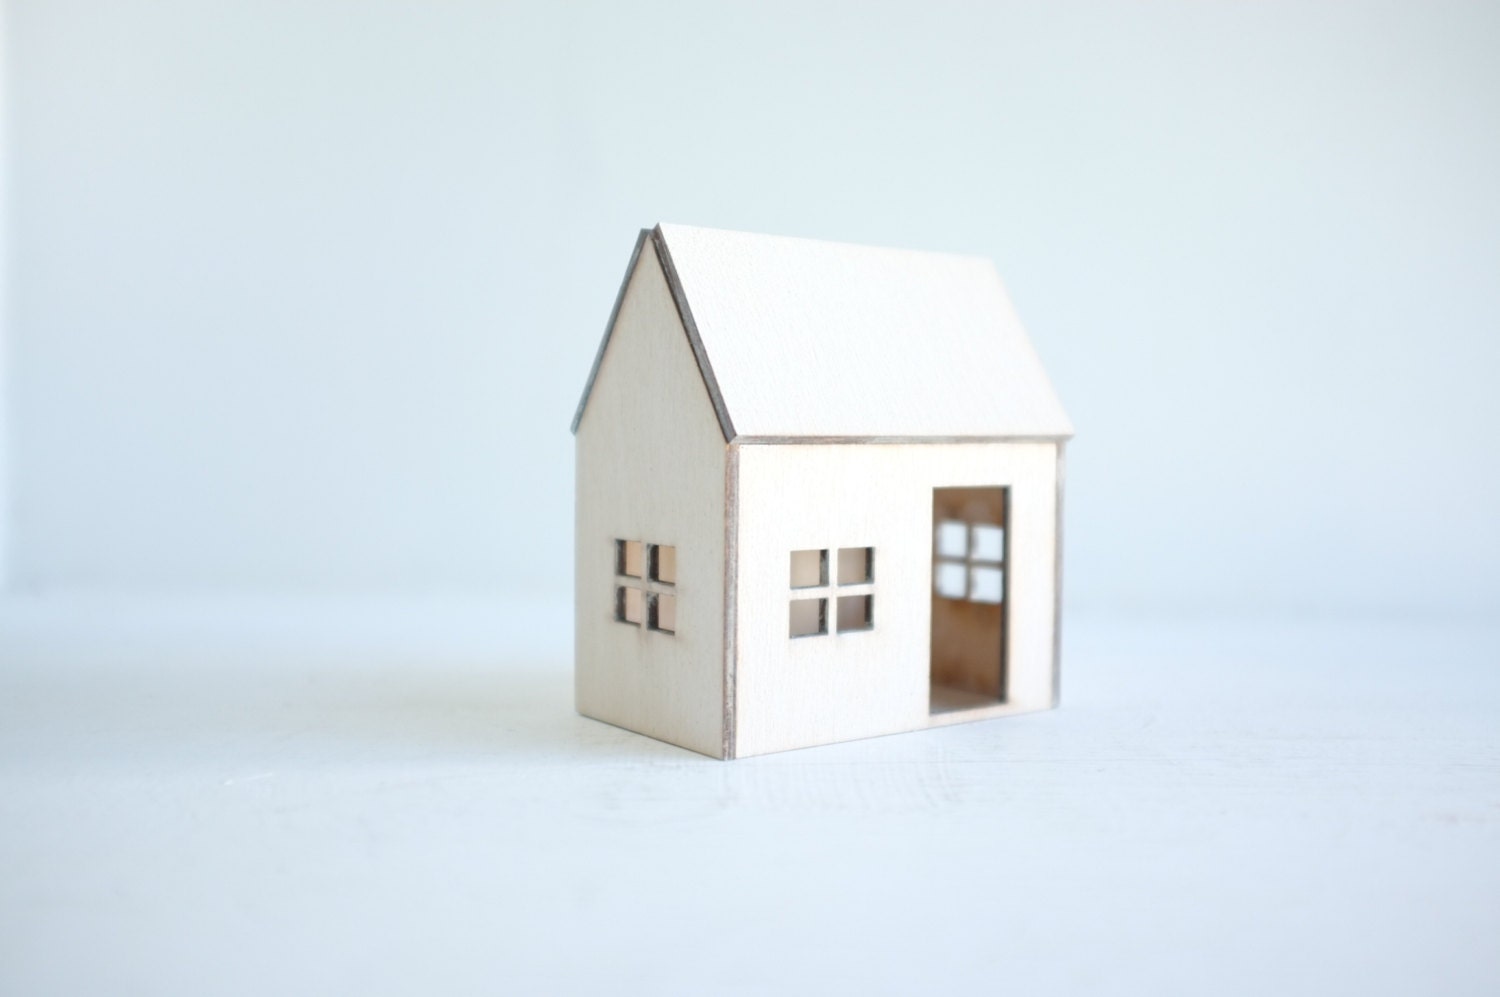 Whitewashed miniature house - small winter white architecture - little wooden geometric structure in ivory - 2of2